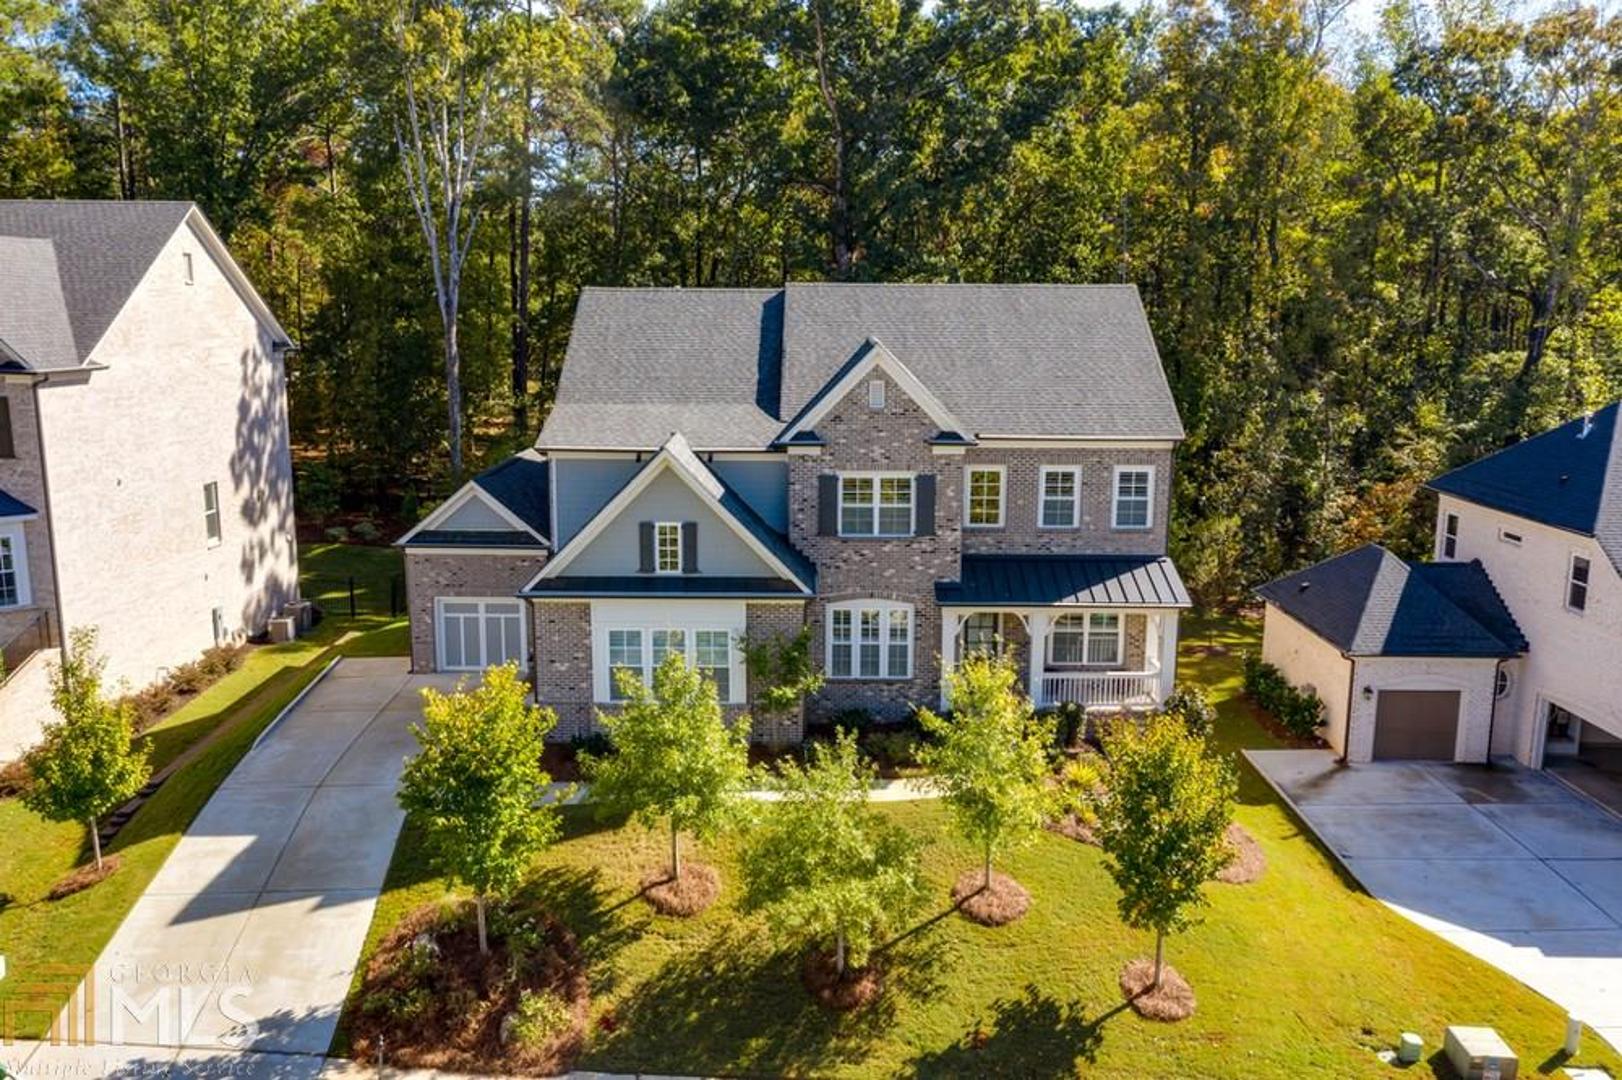 4 sided BRICK beauty in Johns Creek with inviting front porch!